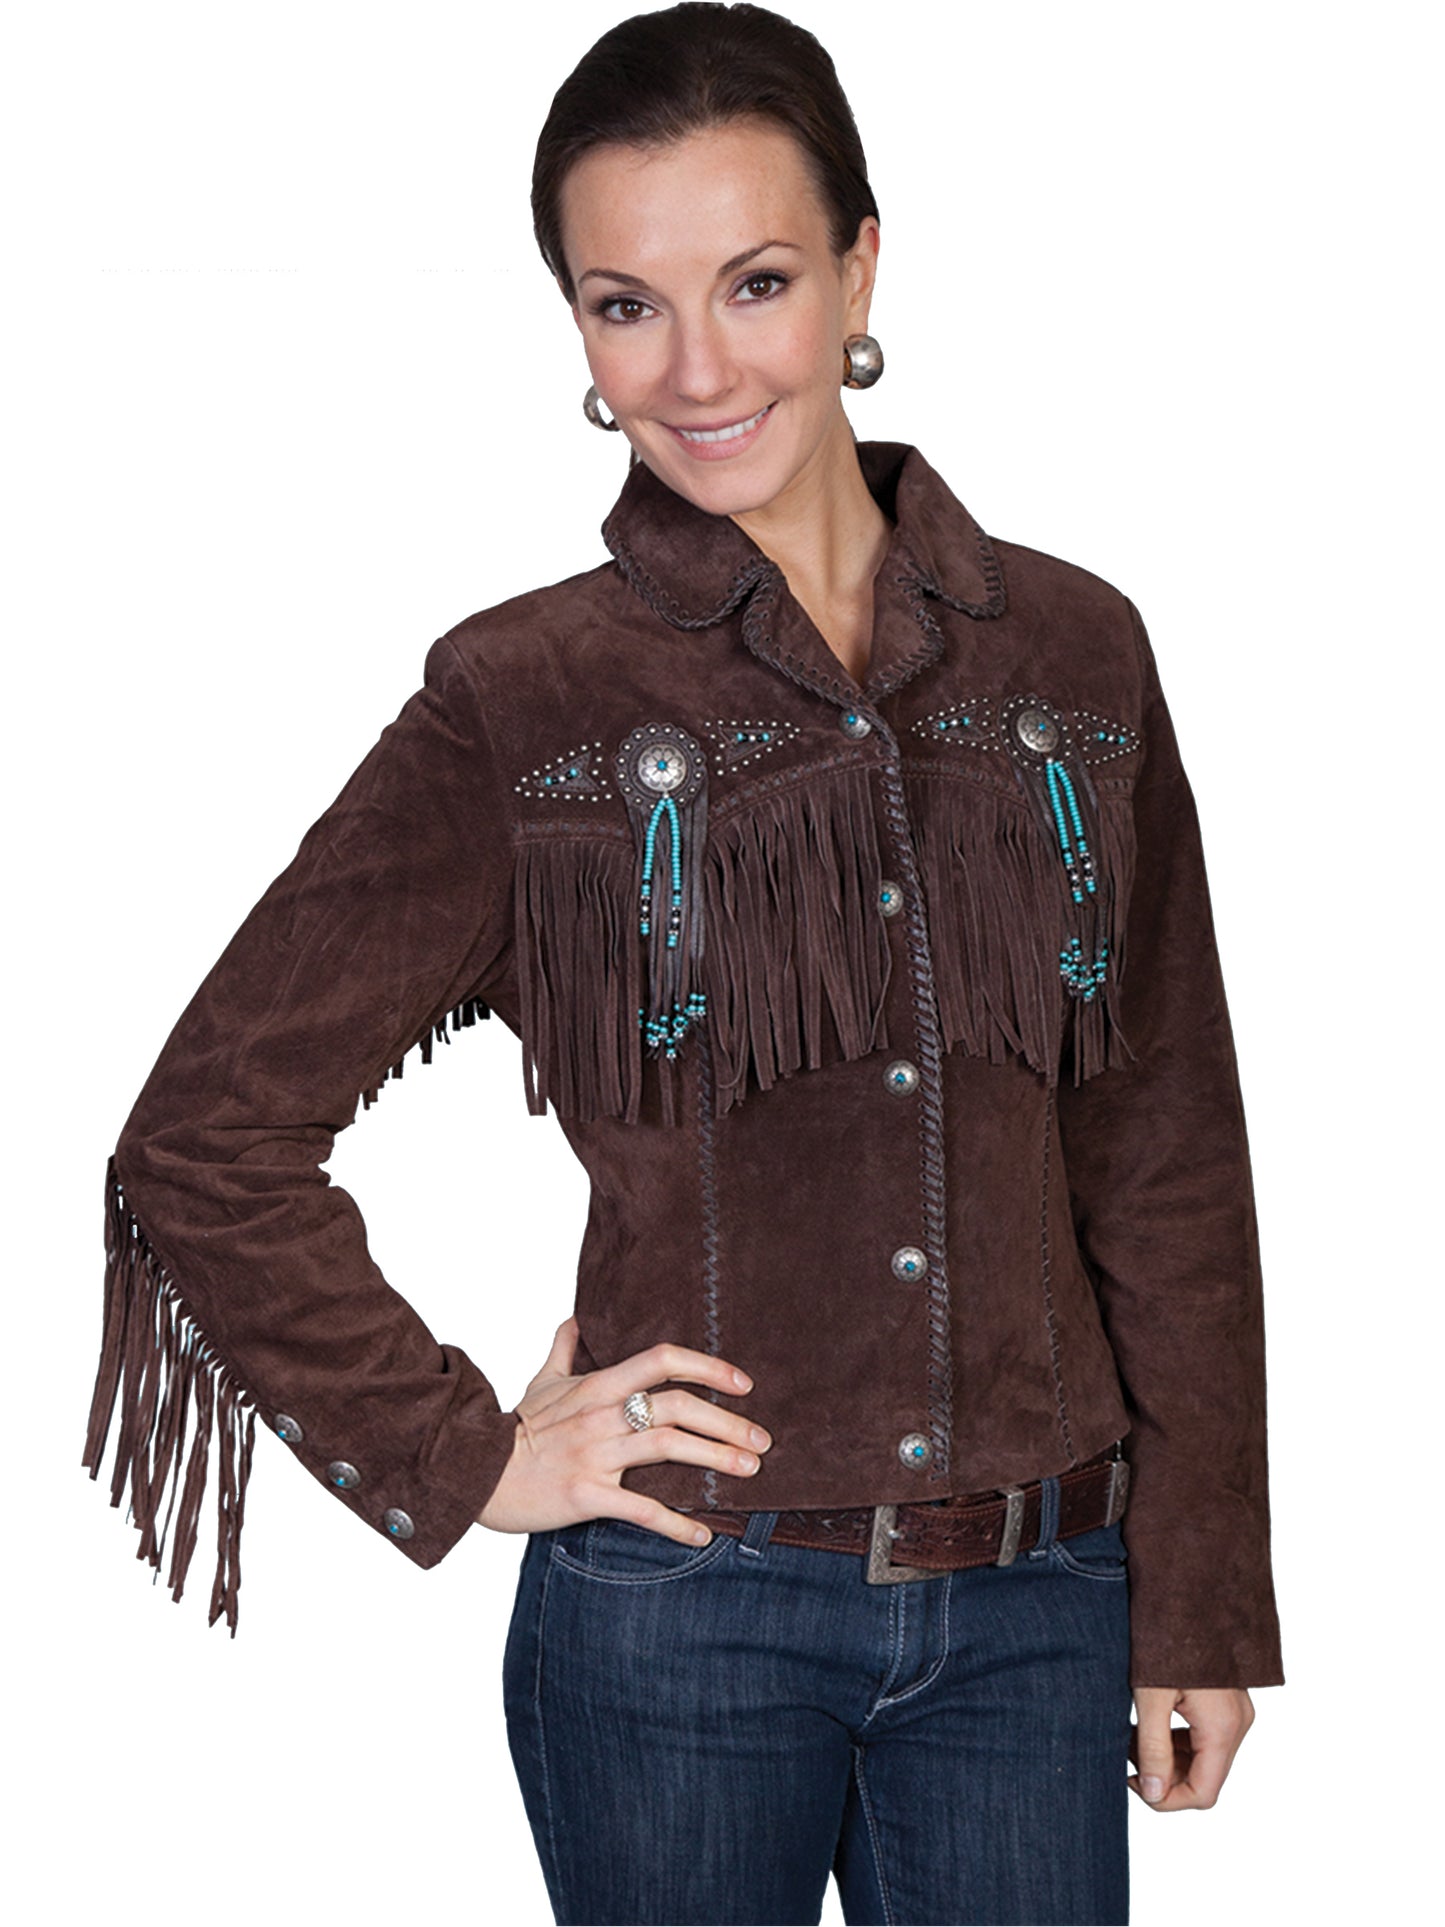 Chocolate Fringe & Beaded Suede Jacket by Scully at Bourbon Cowgirl